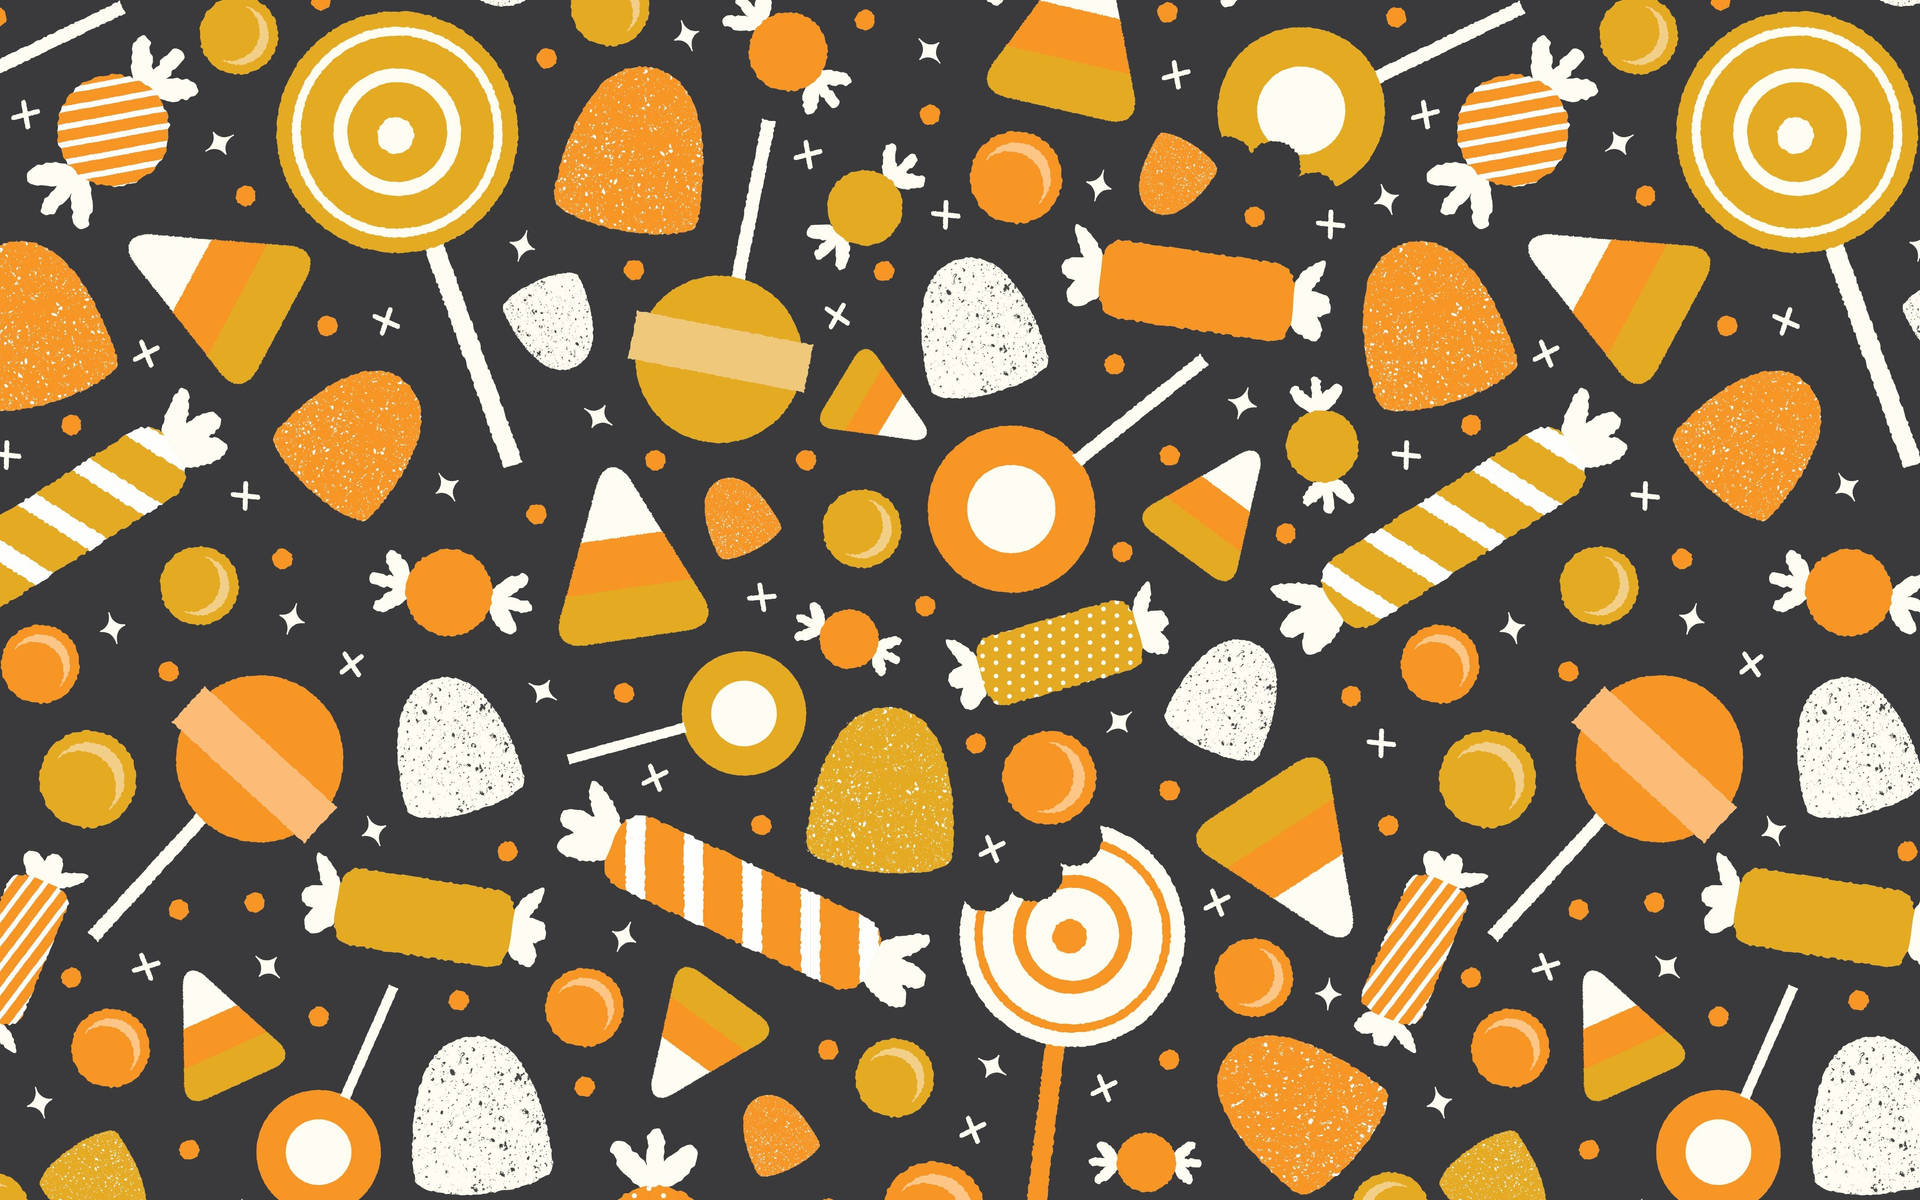 Embrace the Sweetness of Autumn - Cute Fall Candies Wallpaper